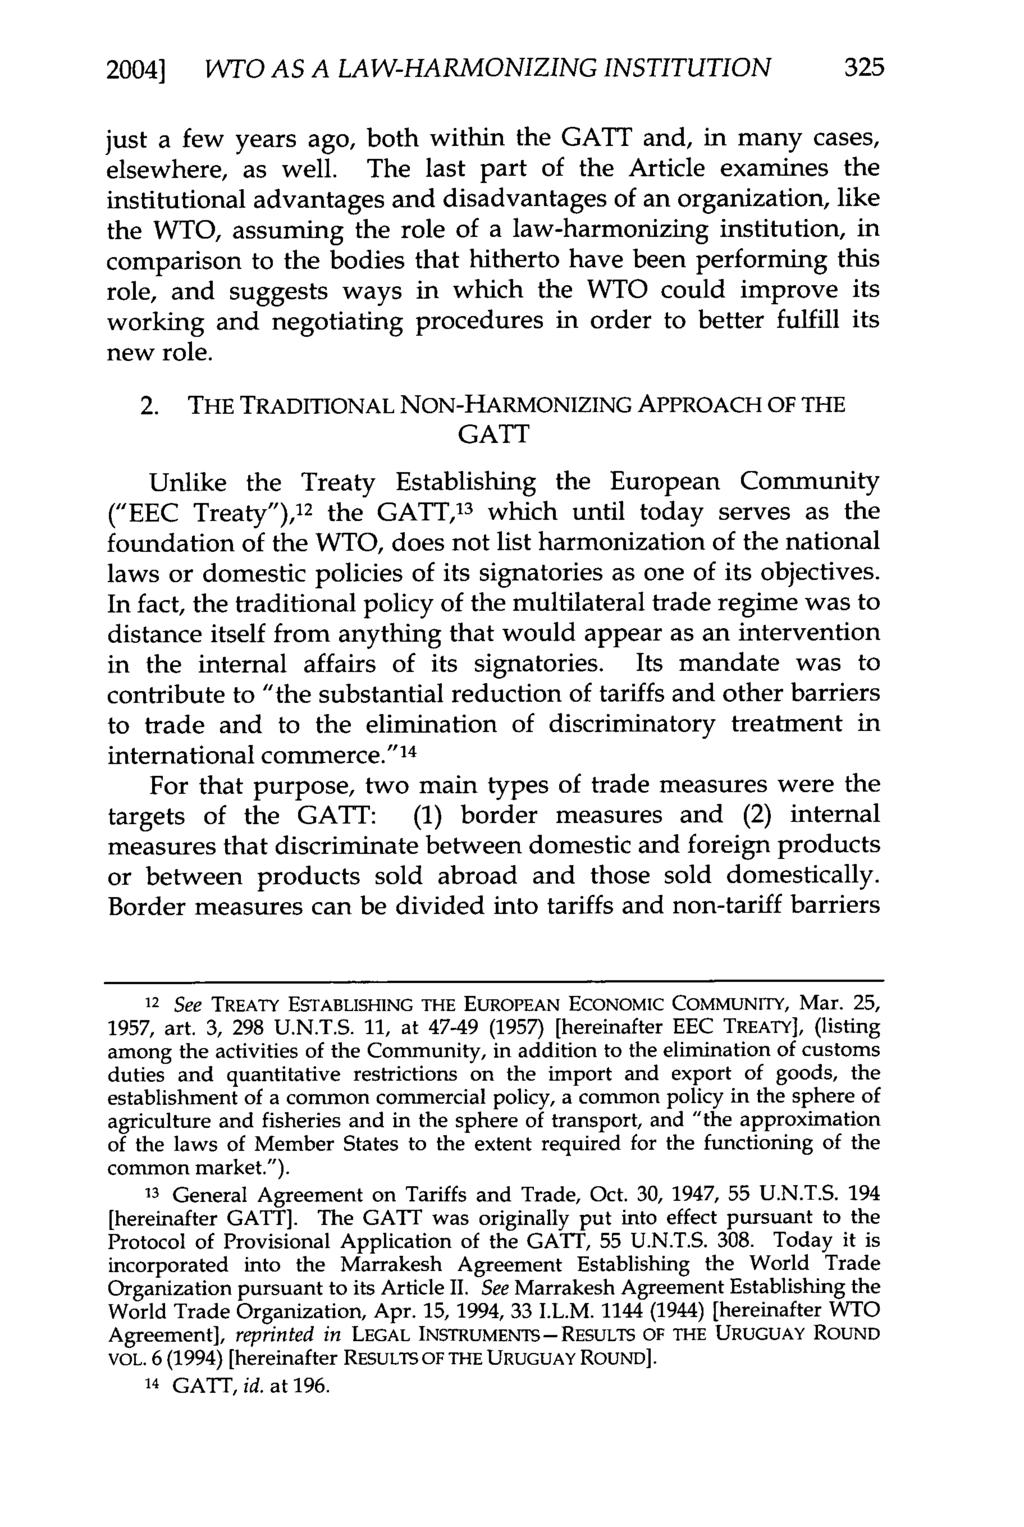 2004] WTO AS A LAW-HARMONIZING INSTITUTION 325 just a few years ago, both within the GATT and, in many cases, elsewhere, as well.